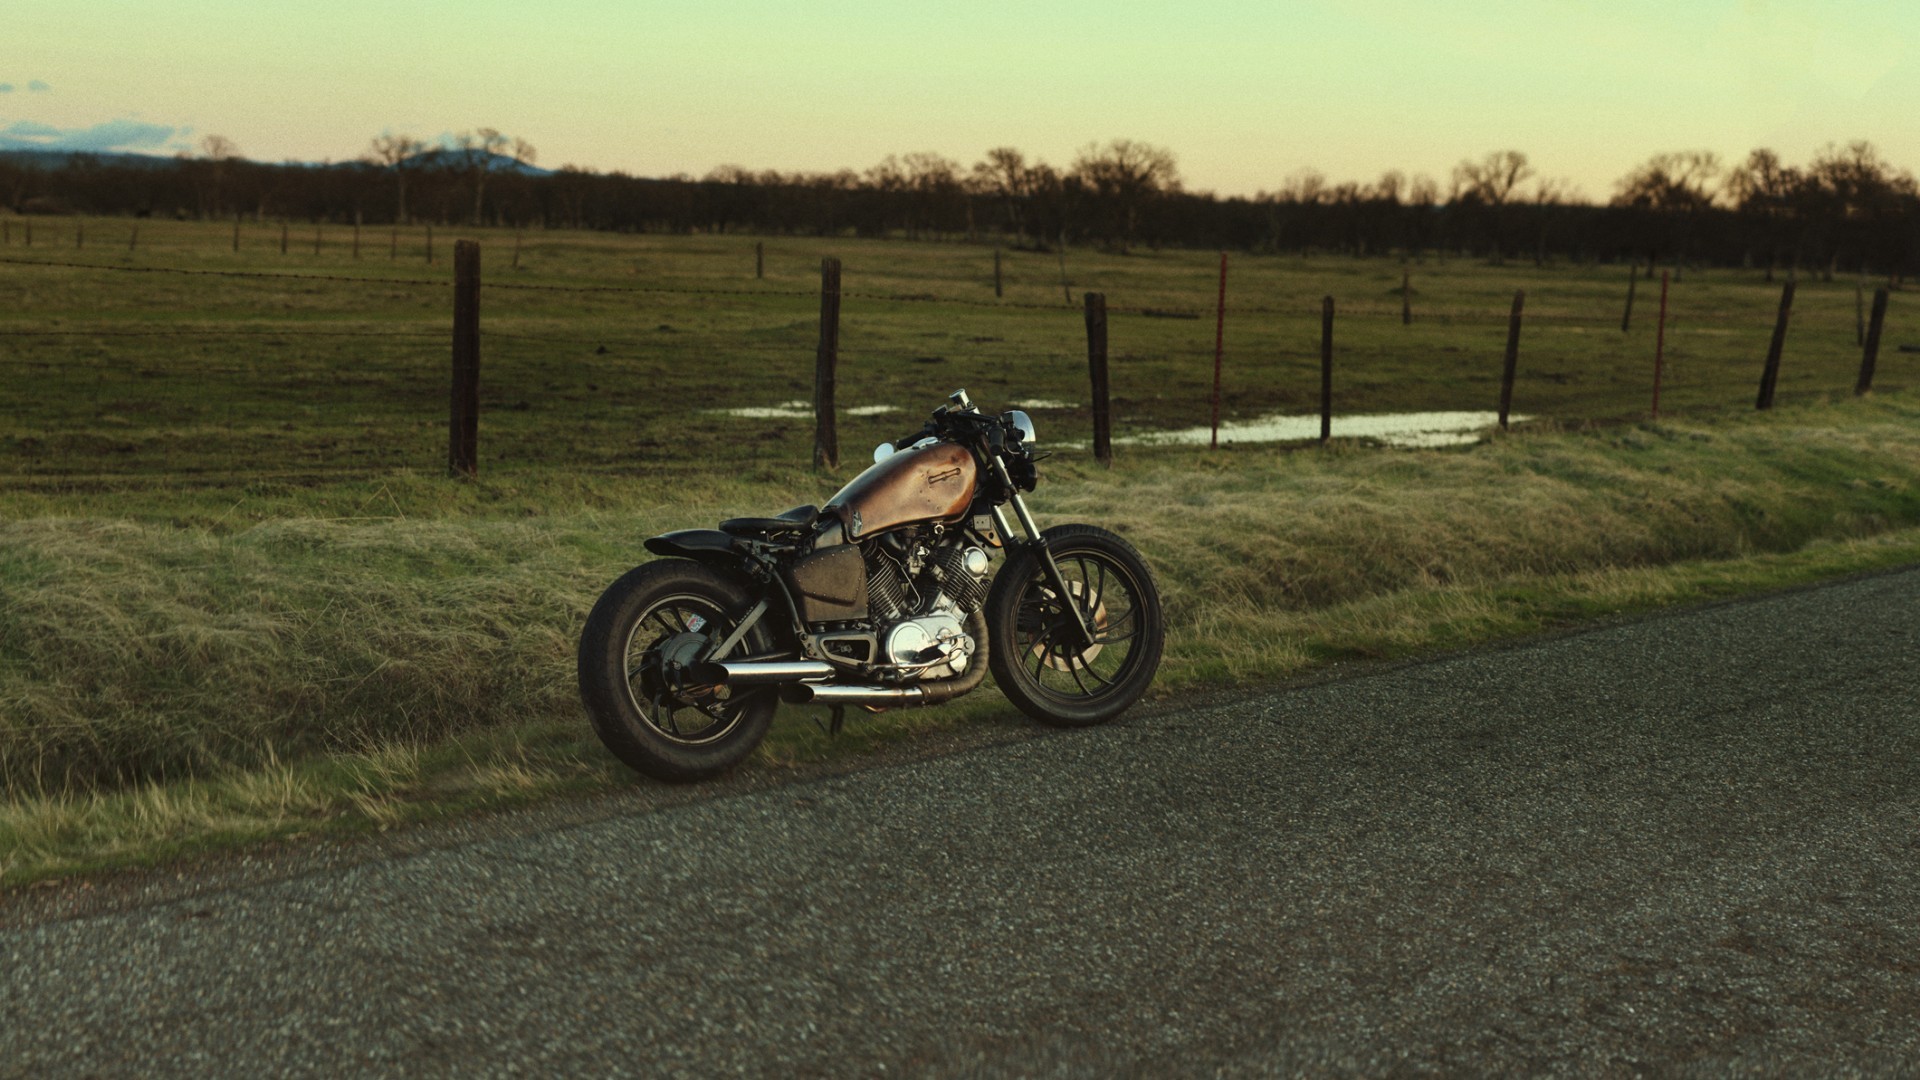 #motorcycle, #field, #fence, #road, #bobber, # - Yamaha Xv 750 , HD Wallpaper & Backgrounds